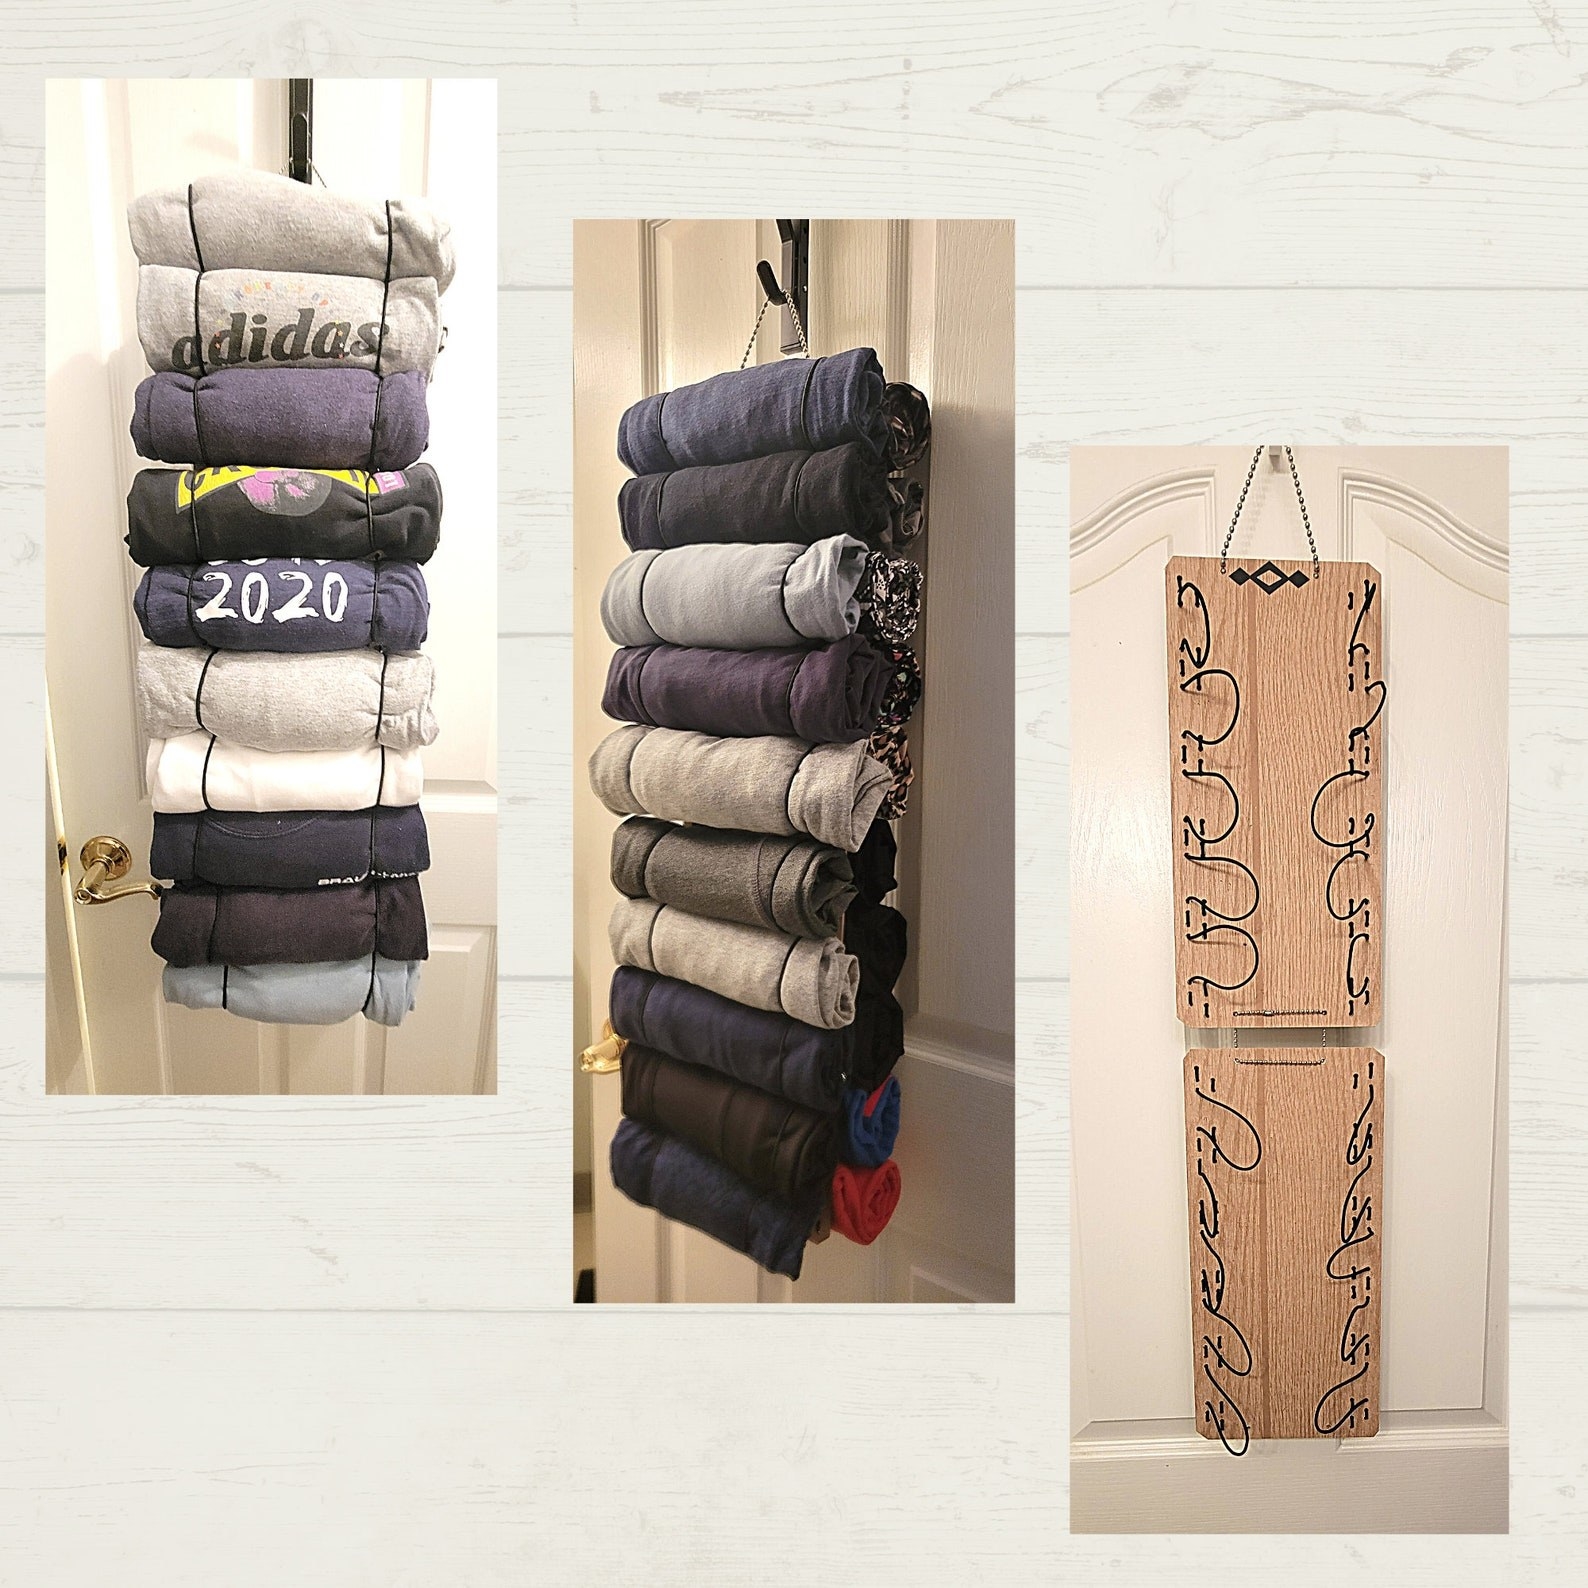 Three images showing how the roll keeper stores t-shirts, towels, and other items compactly